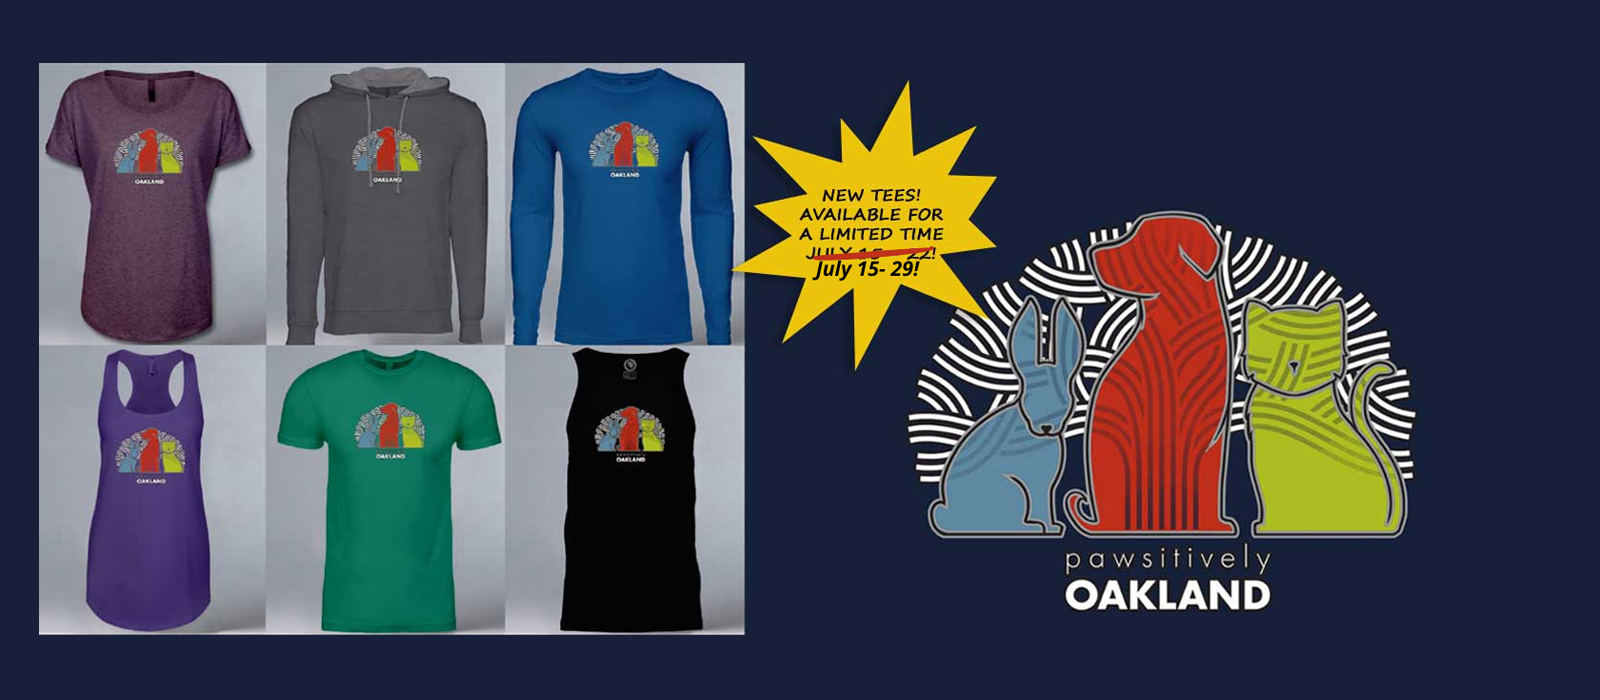 Get your limited Pawsitively Oakland tee in support of OAS!